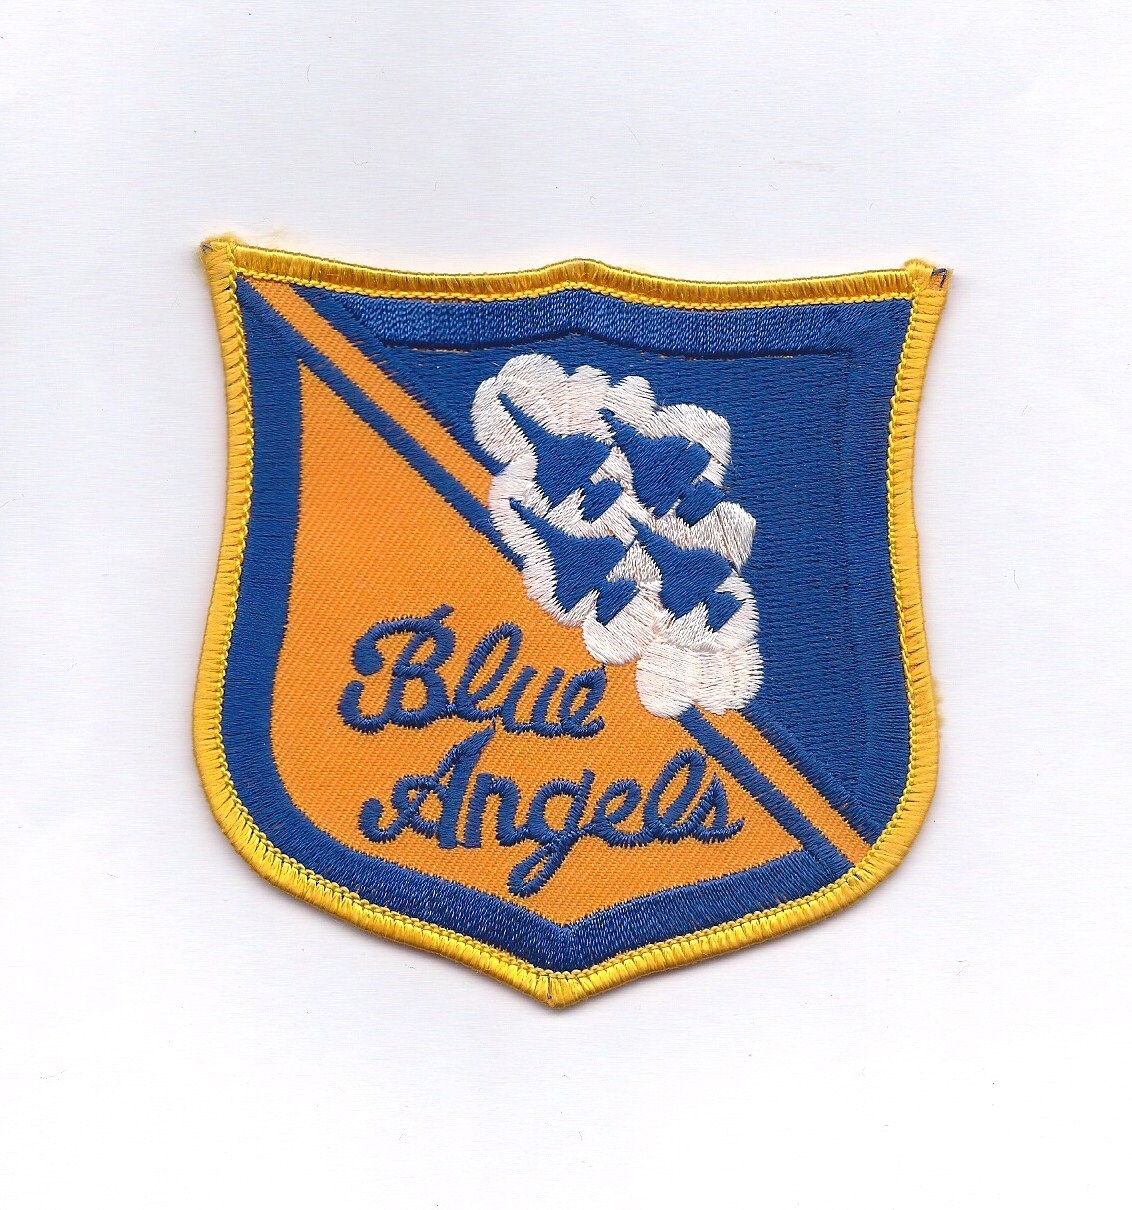 BLUE ANGELS PATCH 50TH ANNIVERSARY 1996 US NAVY MARINES PIN UP ANGEL BA SL102 